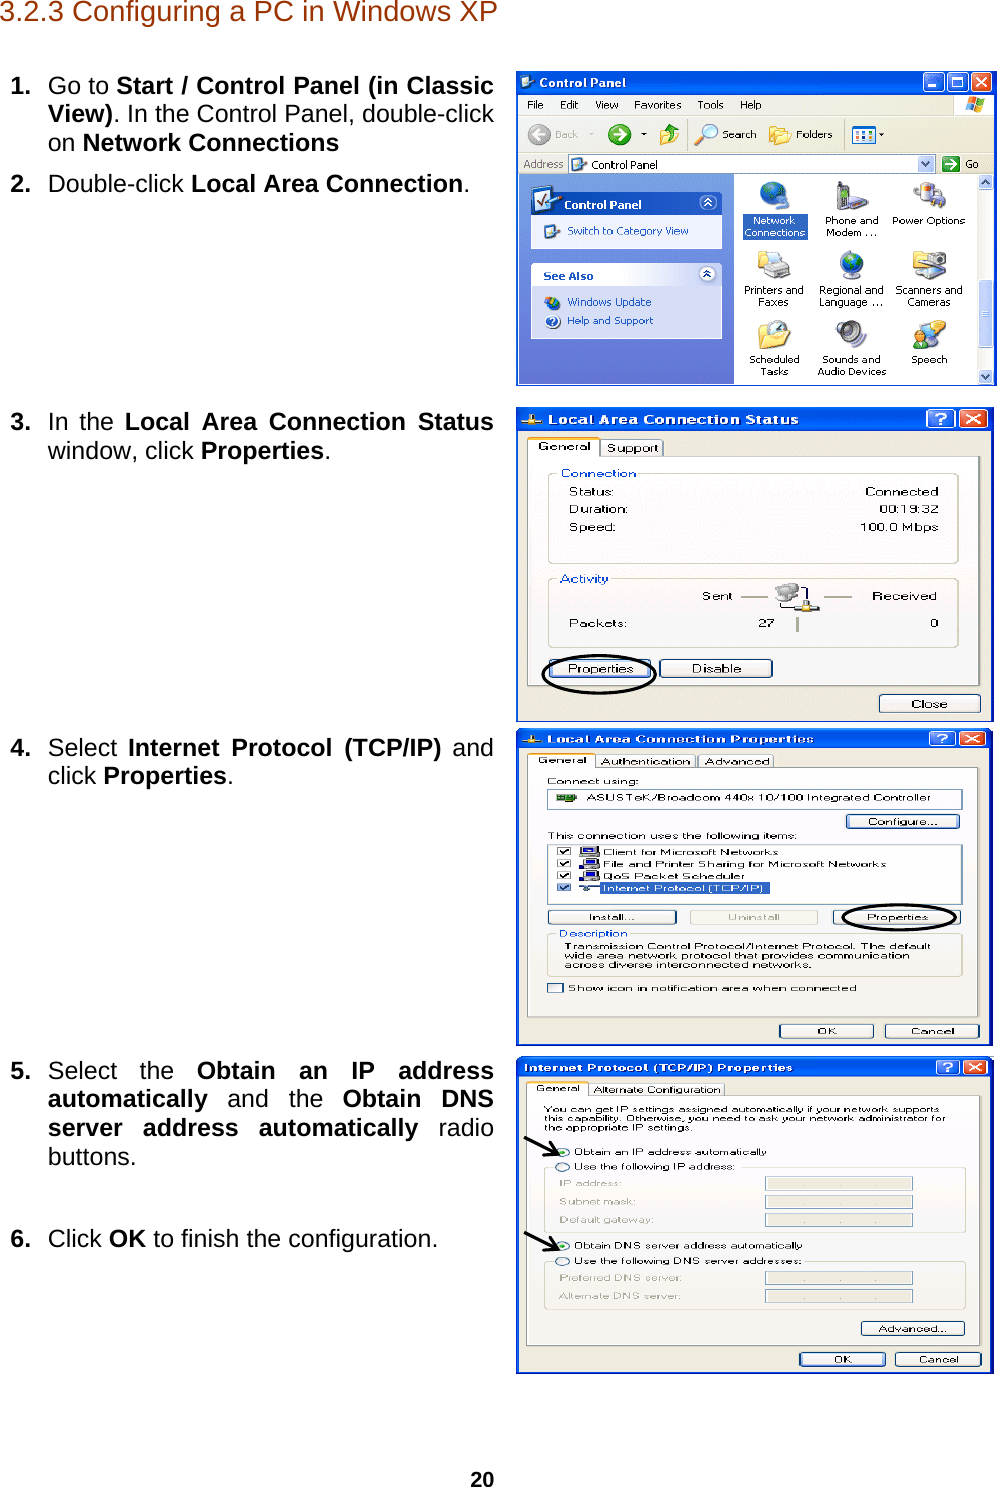 20 3.2.3 Configuring a PC in Windows XP     1.  Go to Start / Control Panel (in Classic View). In the Control Panel, double-click on Network Connections 2.  Double-click Local Area Connection.  3.  In the Local Area Connection Status window, click Properties. 4.  Select  Internet Protocol (TCP/IP) and click Properties.  5.  Select the Obtain an IP address automatically  and the  Obtain DNS server address automatically radio buttons.  6.  Click OK to finish the configuration.   